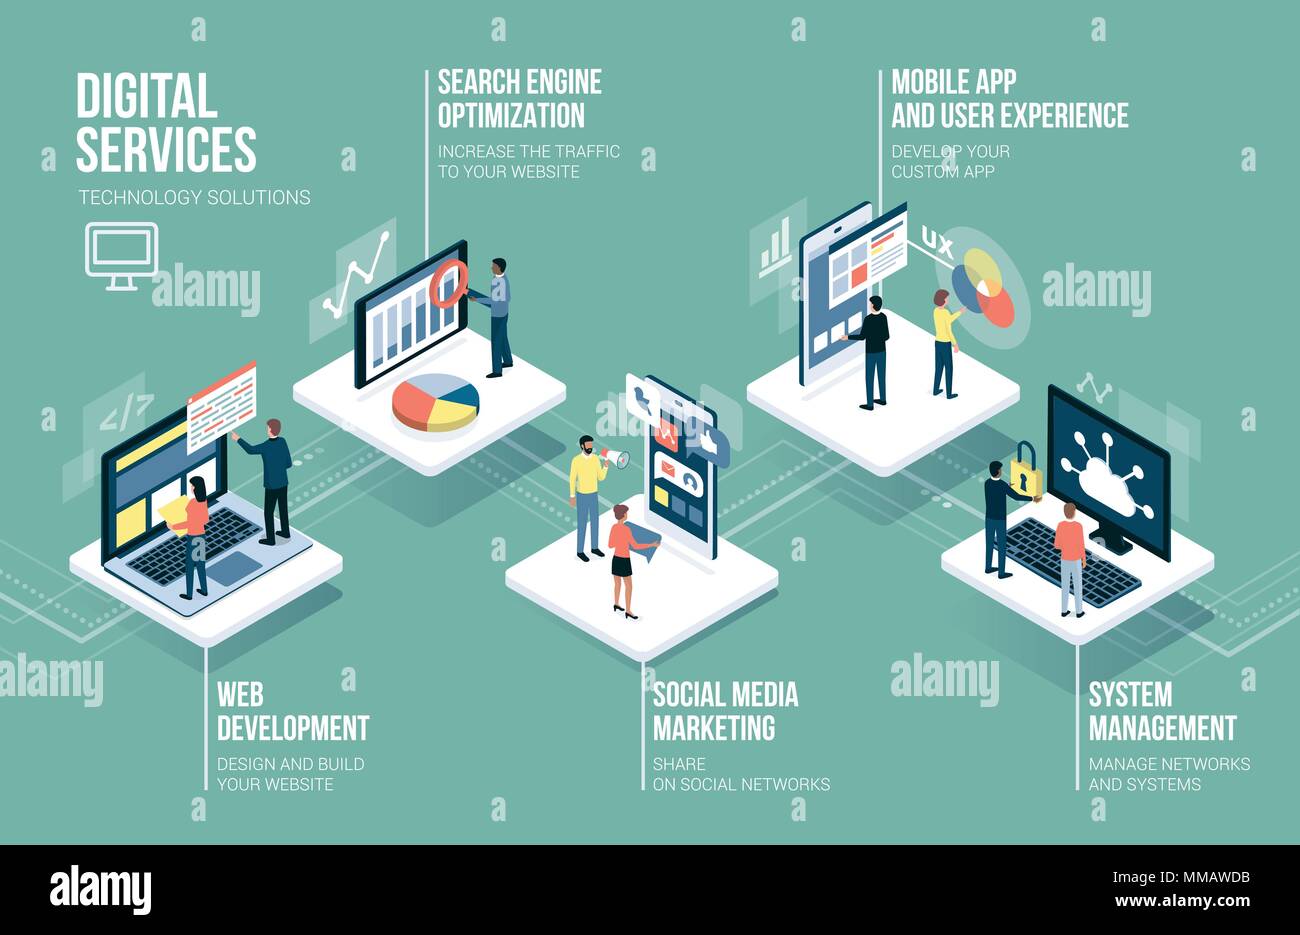 Web development, communication technology, social media and marketing services infographic with people, computers and touch screen devices Stock Vector